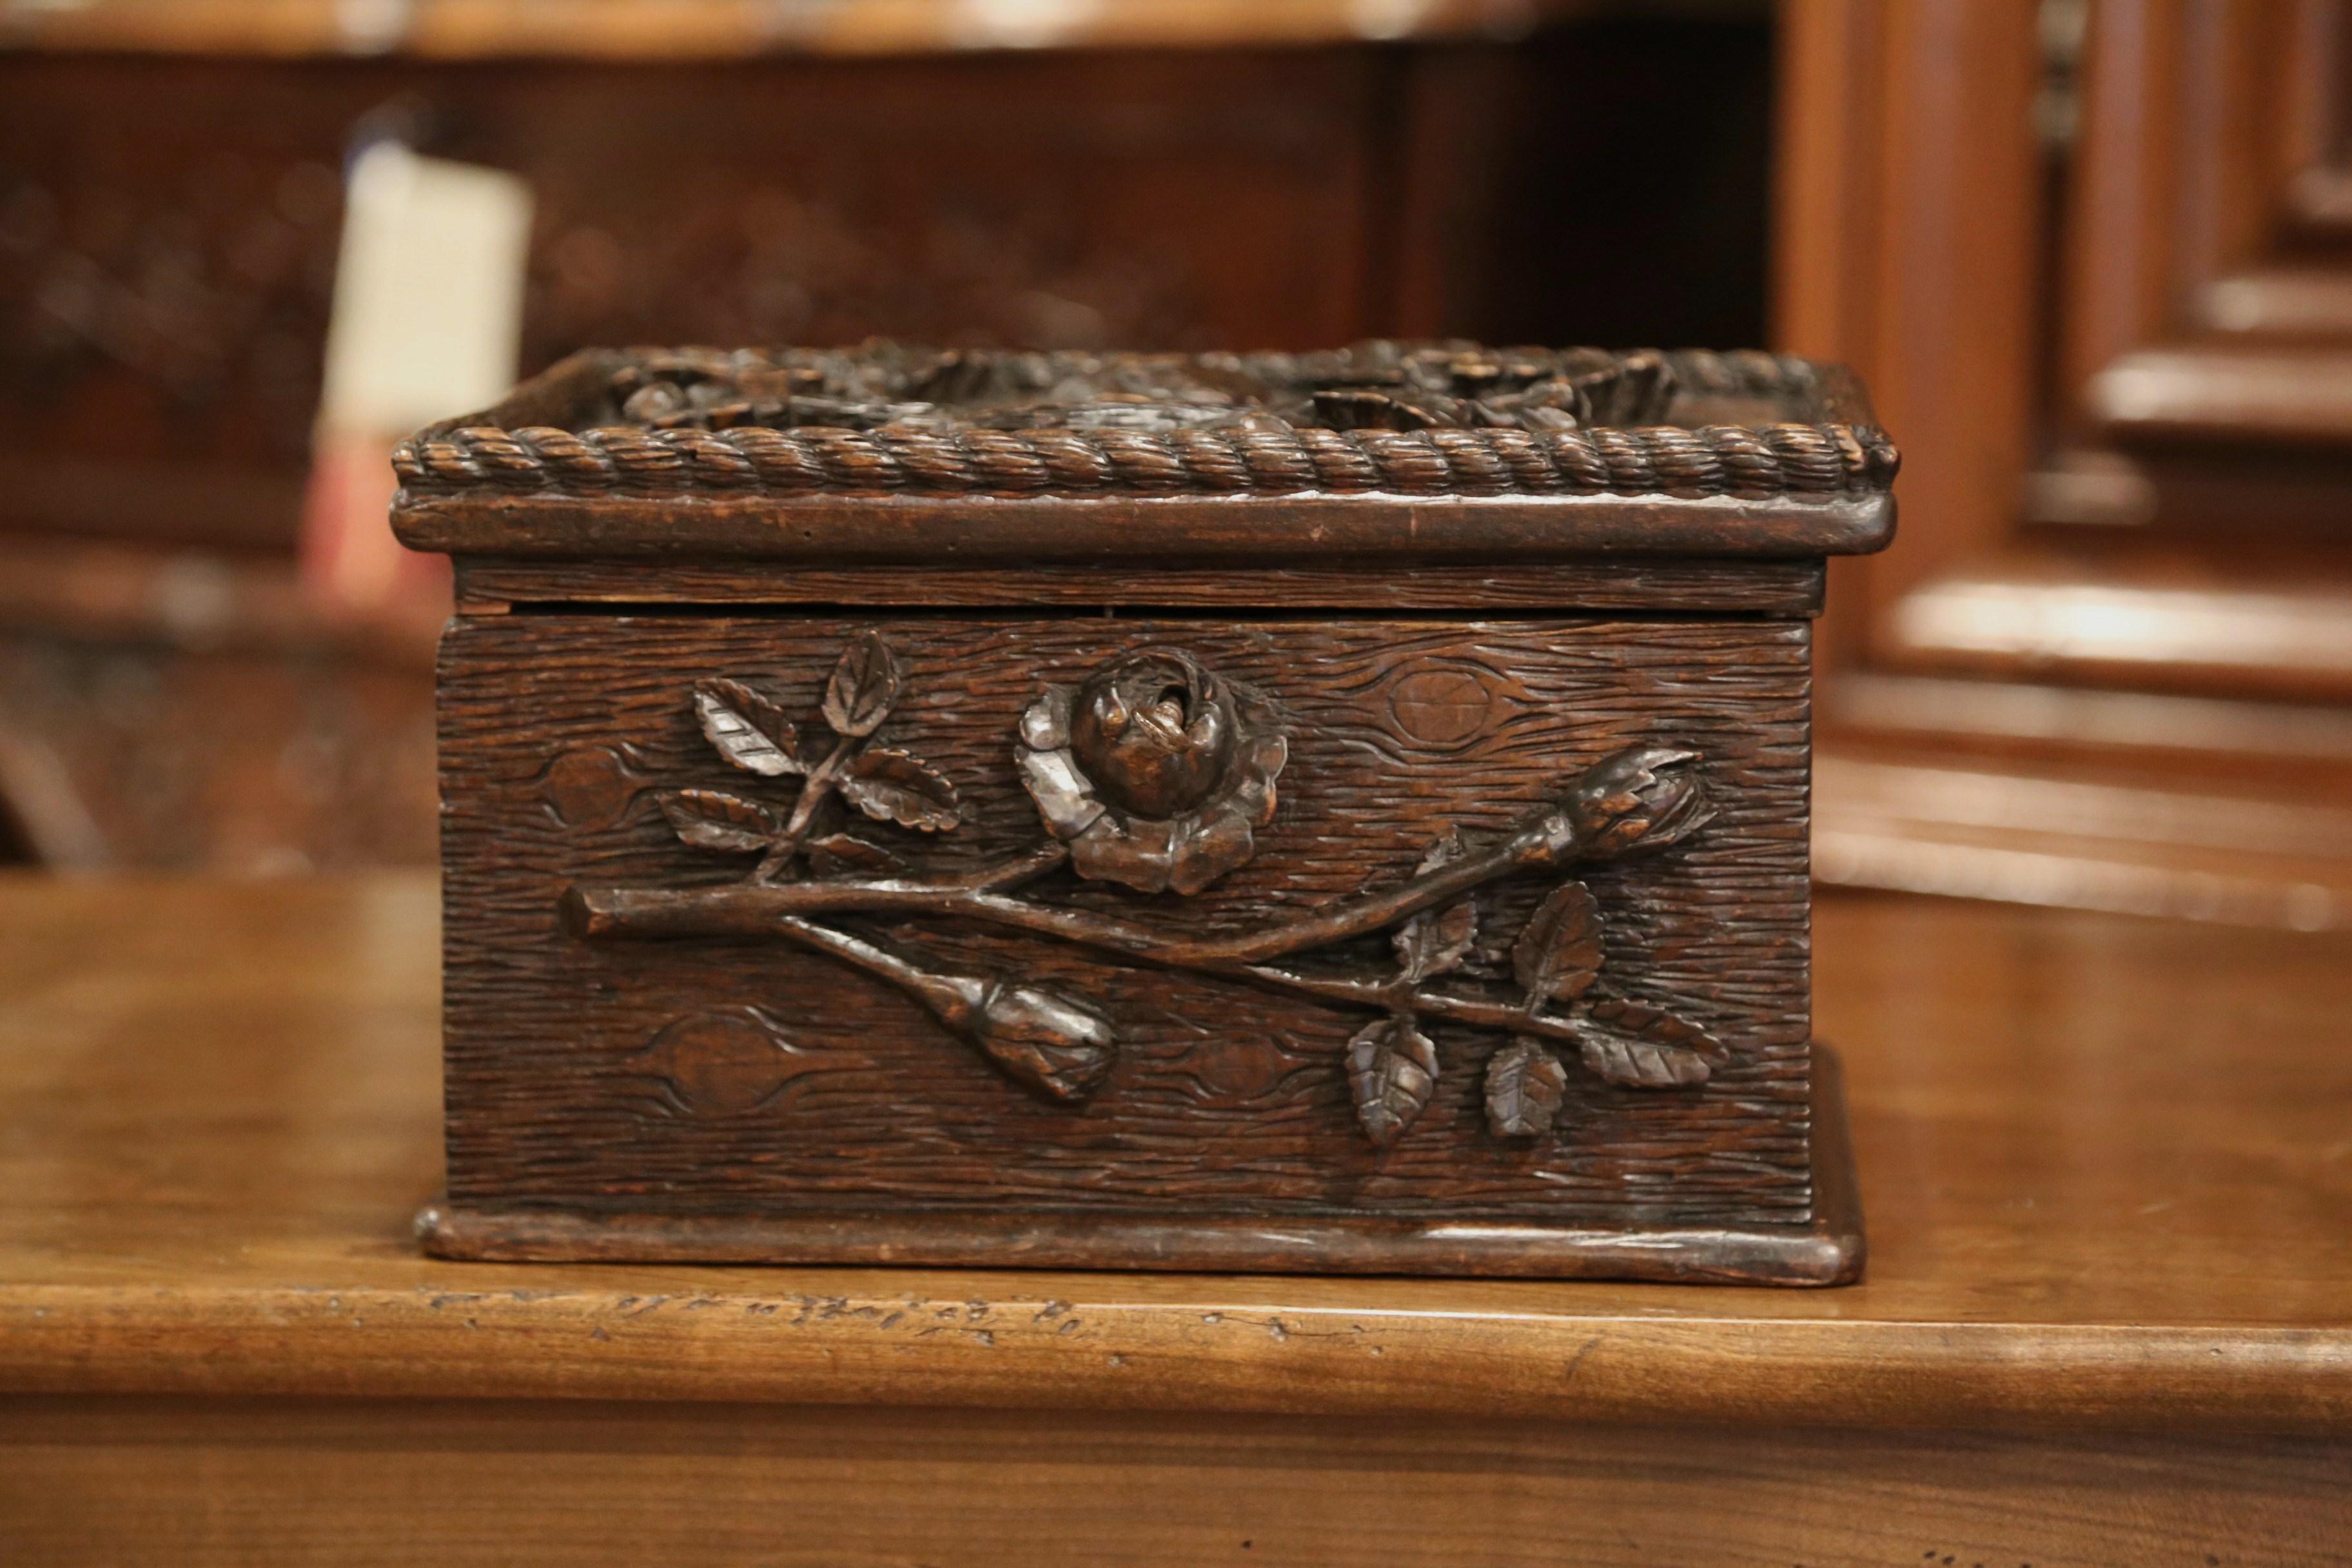 Store your remote controls or other valuables in this rectangular Black Forest letter box. Crafted in France circa 1870, this small, decorative coffer is made of oak and has high relief carvings on the top and front. The top is framed with rope